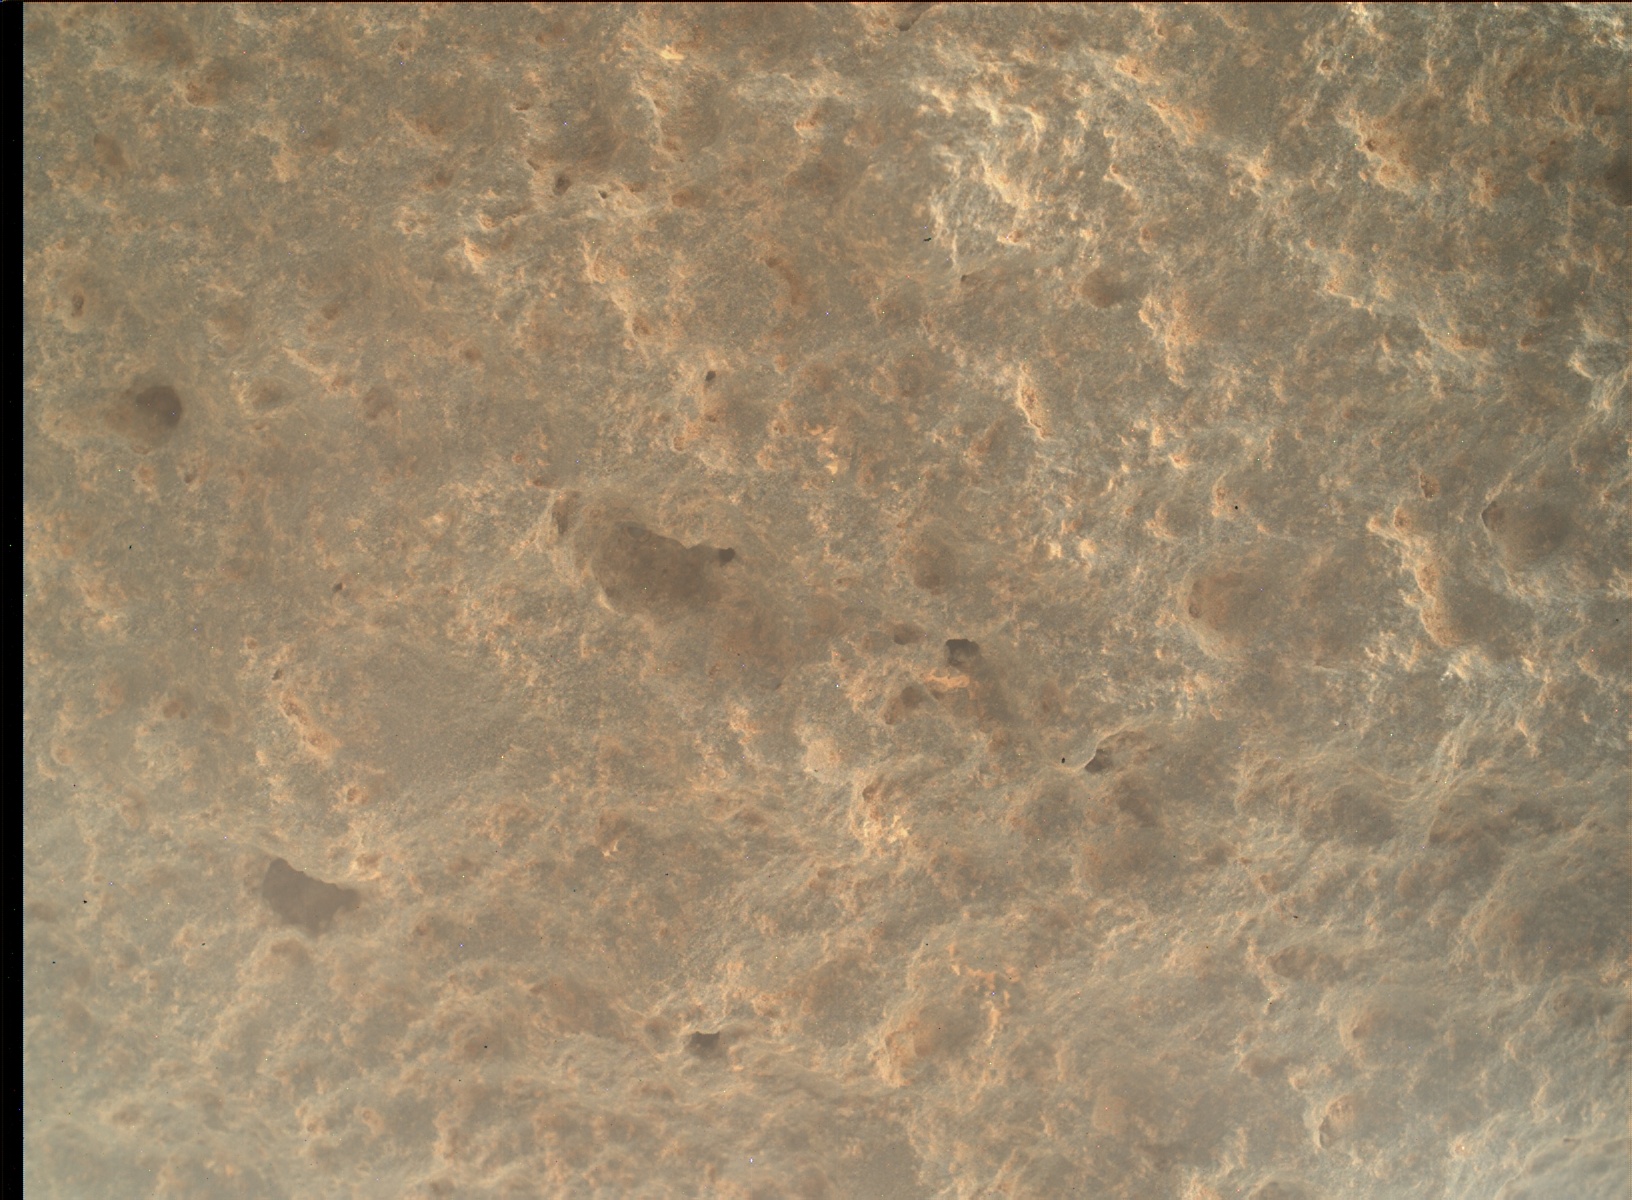 Nasa's Mars rover Curiosity acquired this image using its Mars Hand Lens Imager (MAHLI) on Sol 1409